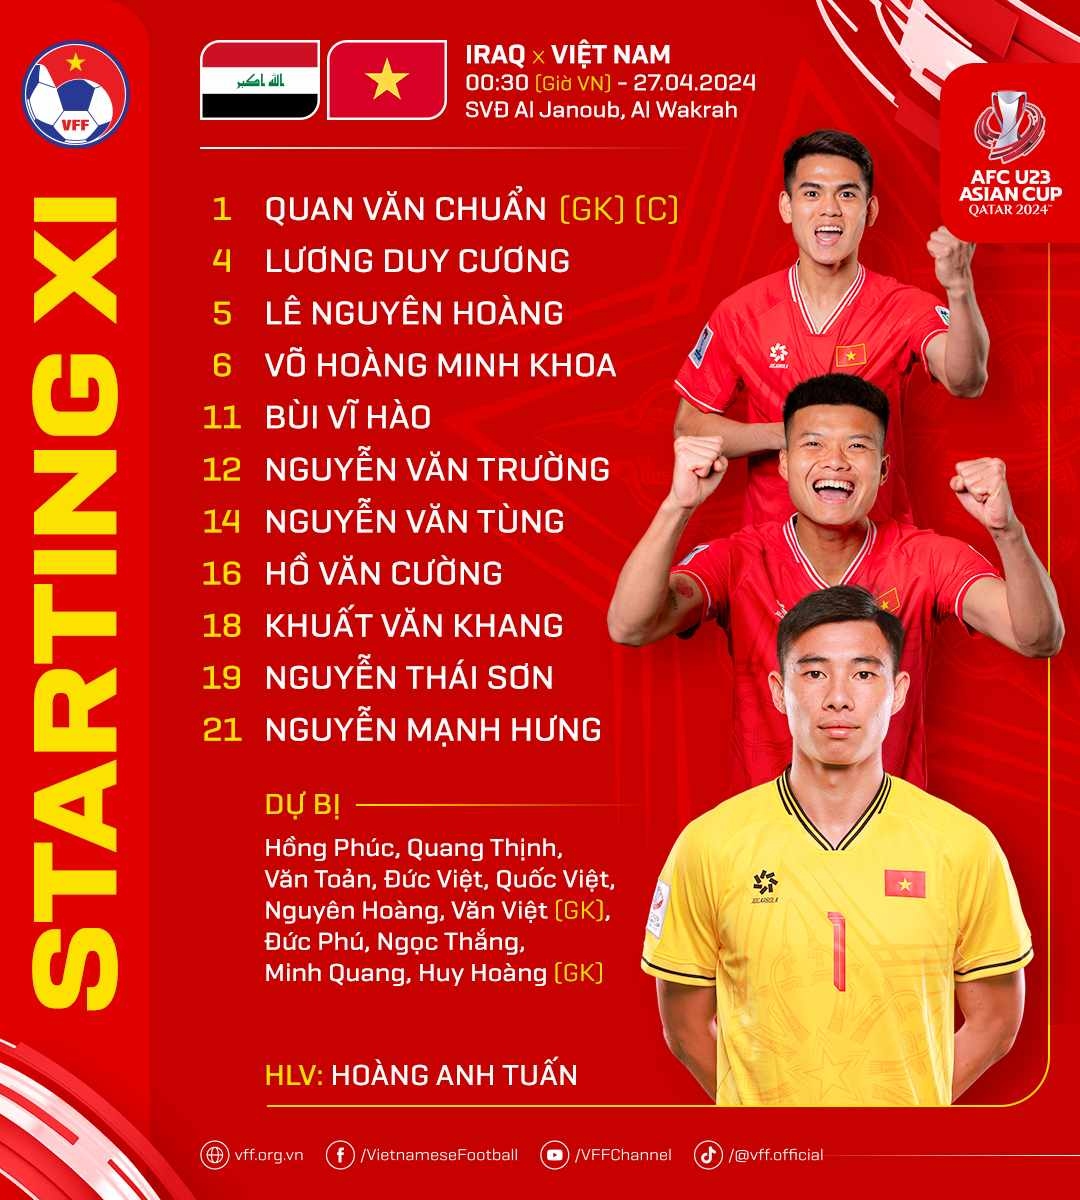 thua iraq, u23 viet nam bi loai o tu ket u23 chau A 2024 hinh anh 4